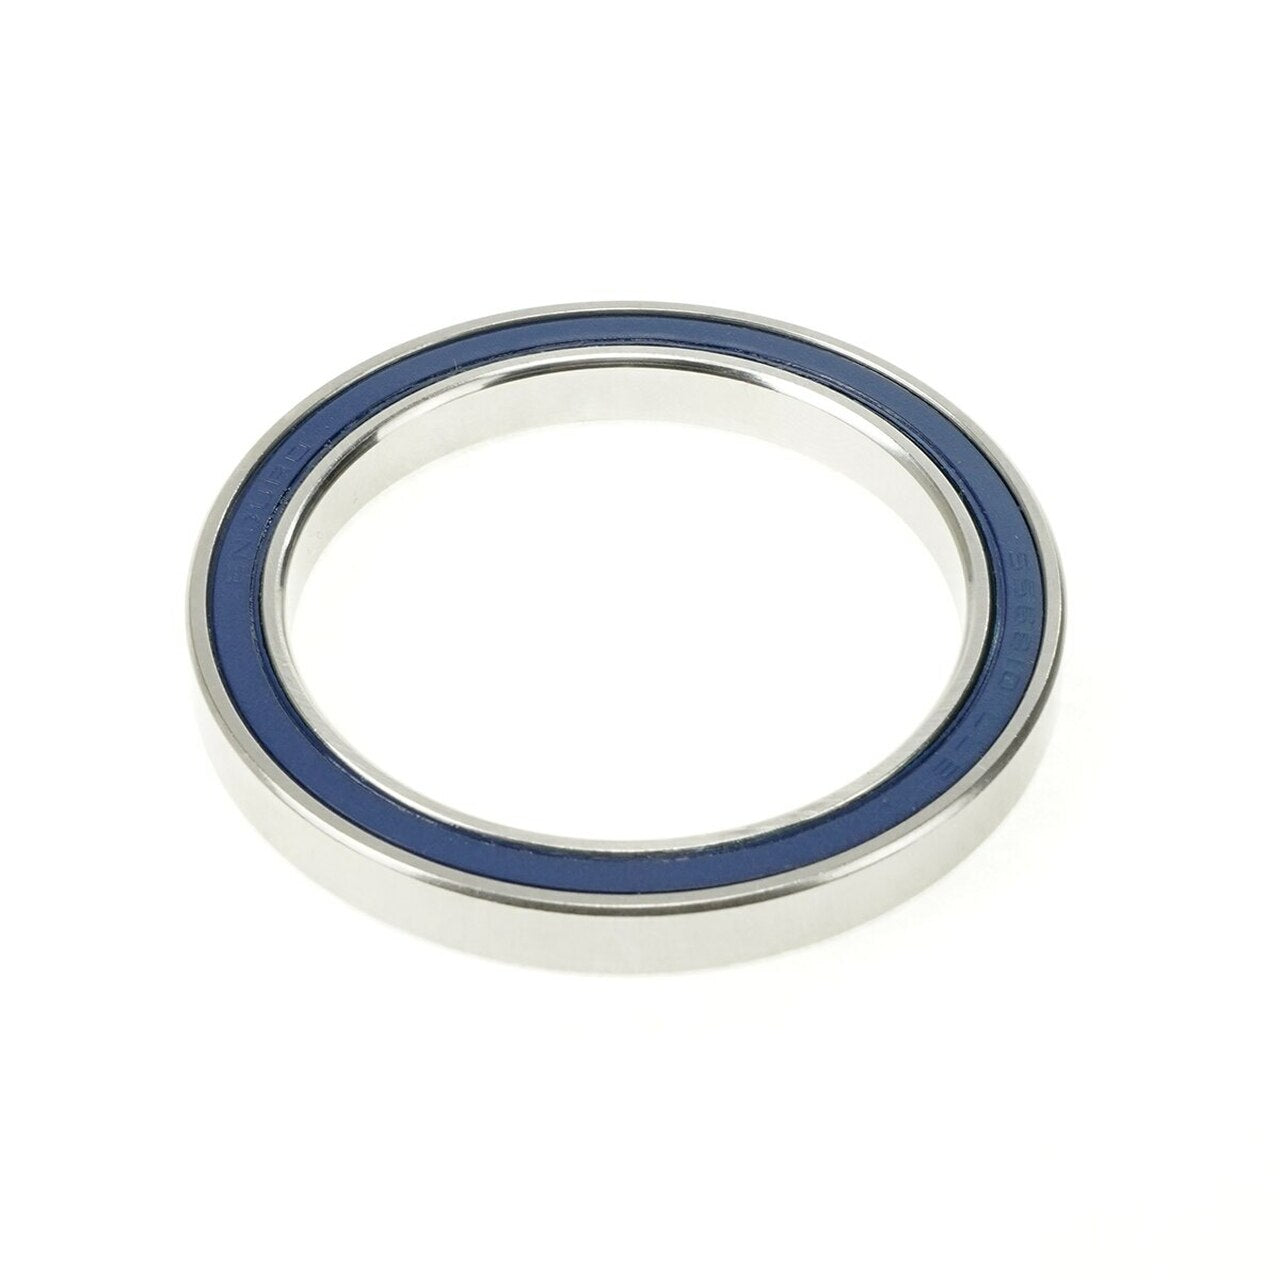 Enduro 6810 LLB - ABEC-3 Radial Bearing (C3 Clearance) - 50mm x 65mm x 7mm (S6810 pictured)